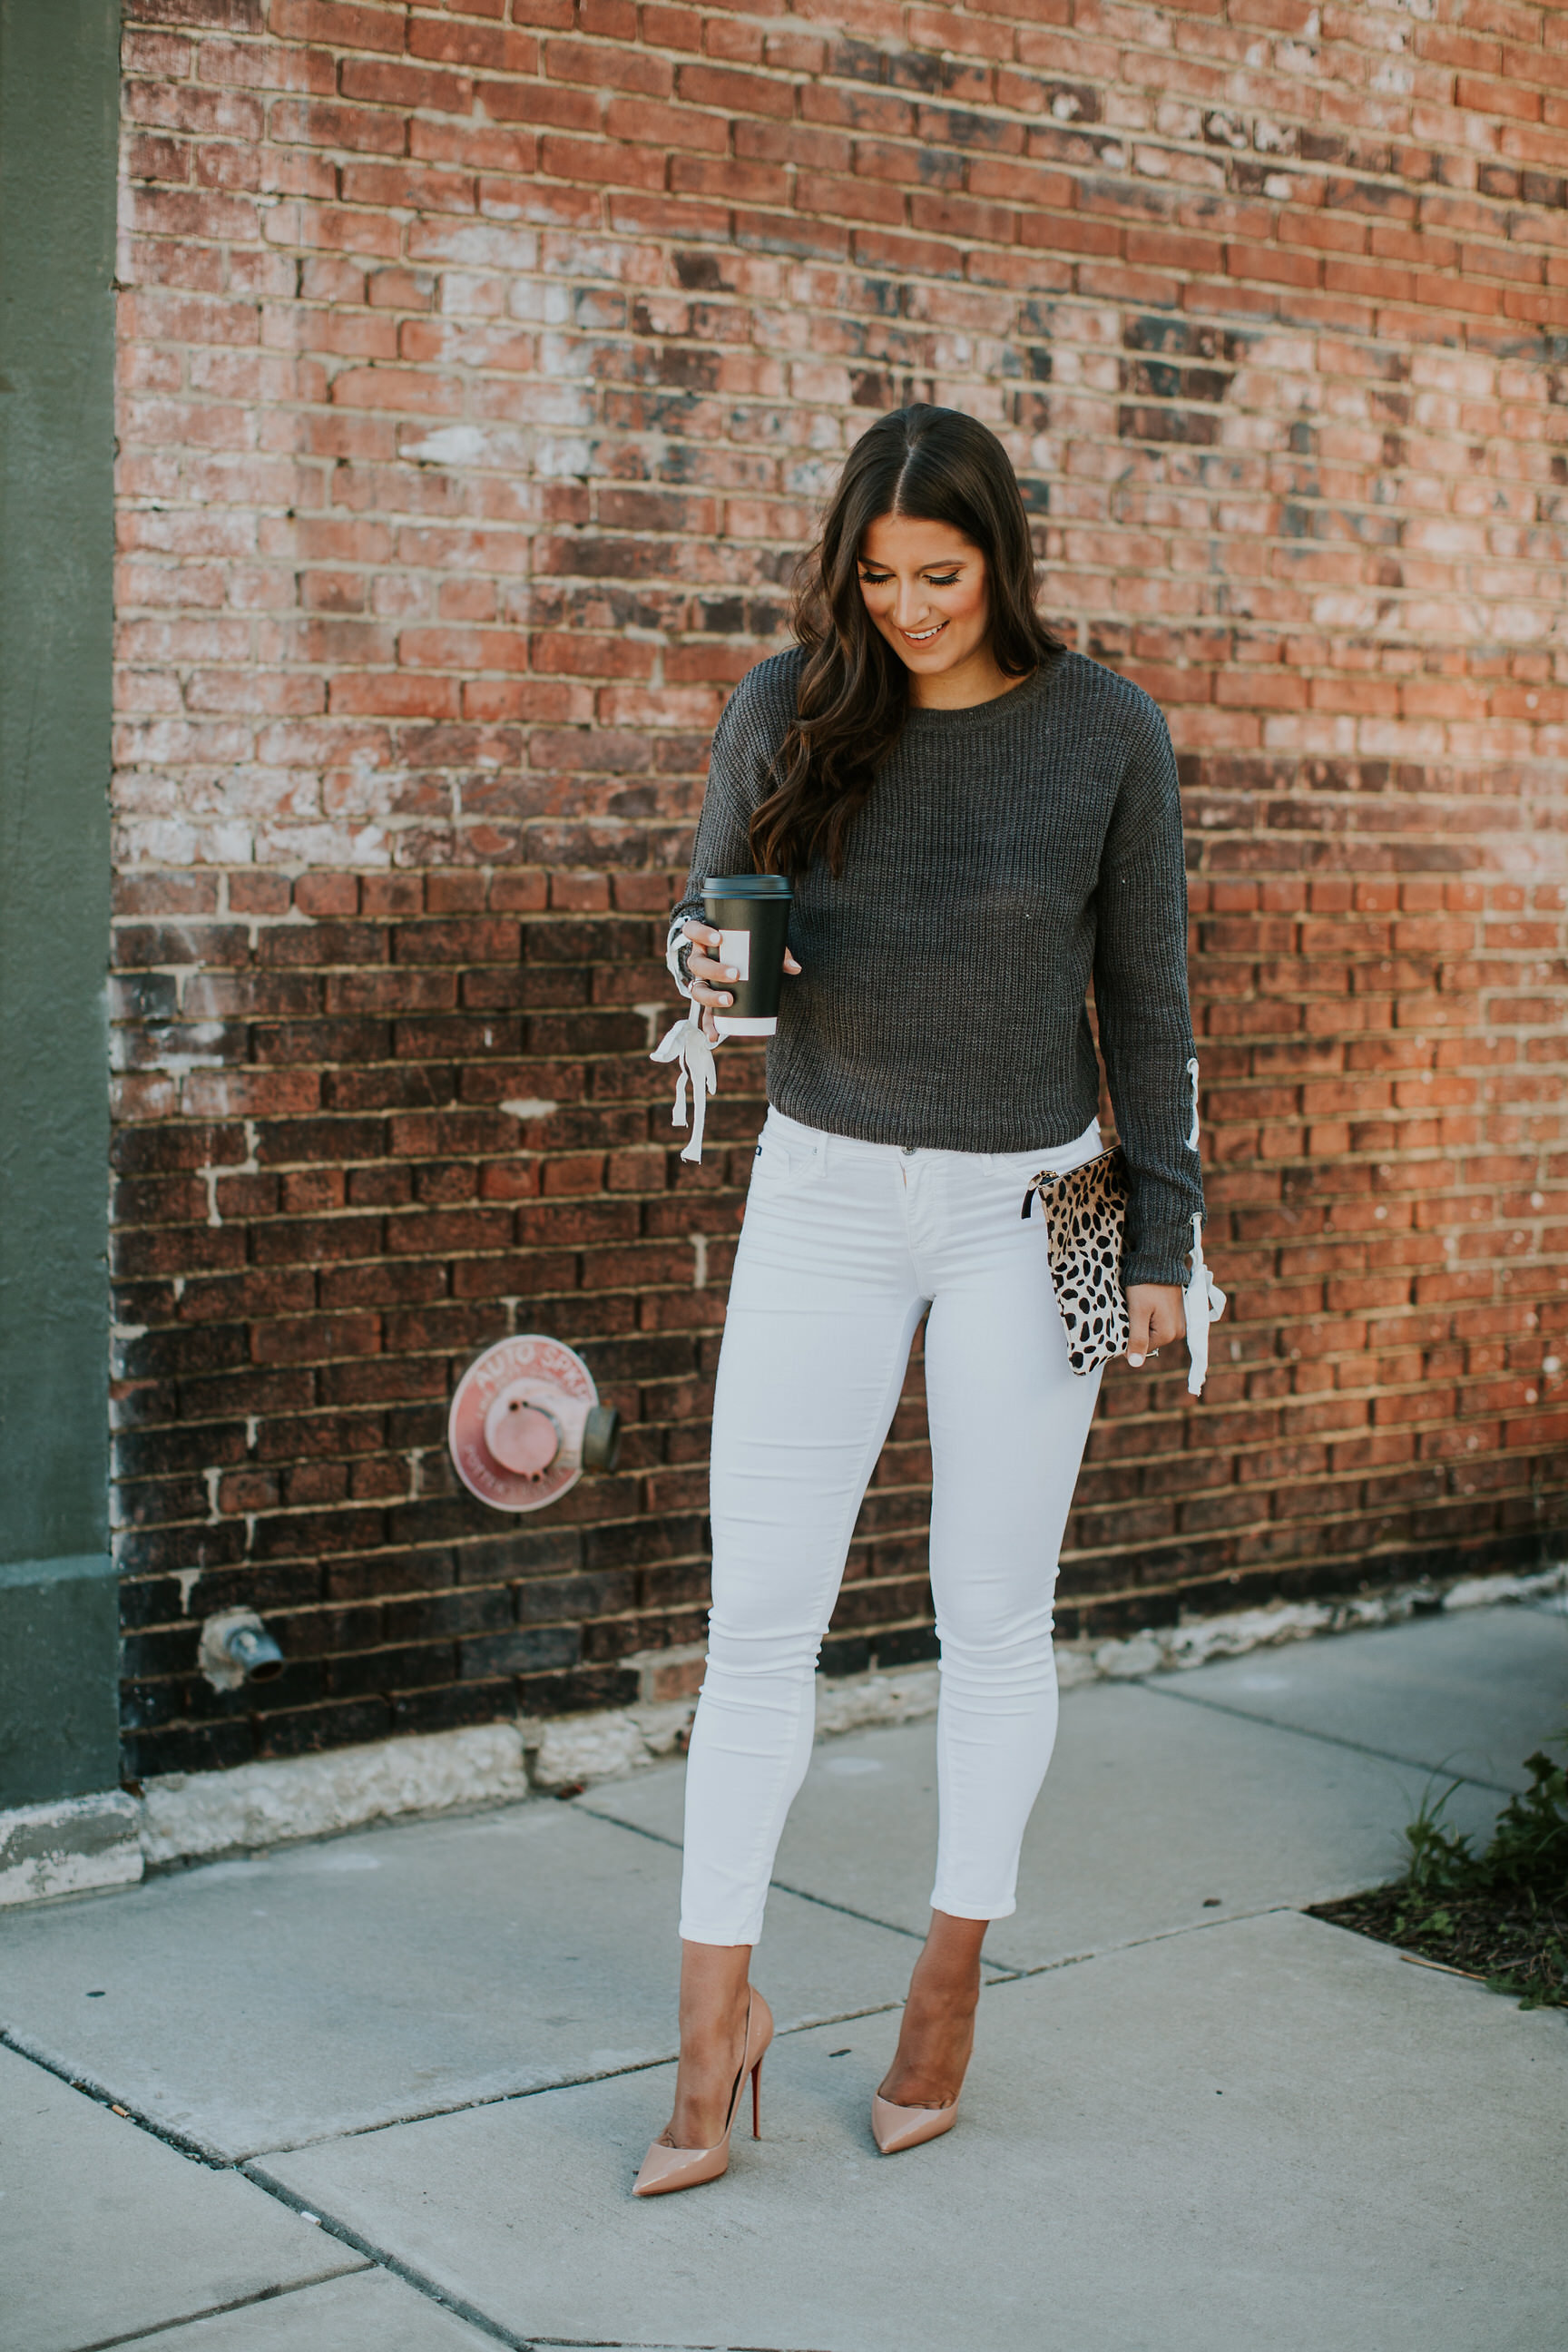 lace up sweater, affordable sweaters, fall sweaters, fall style, fall outfits, cute fall fashion, calf hair clutch, clare v leopard clutch, lace up sleeves // grace wainwright a southern drawl